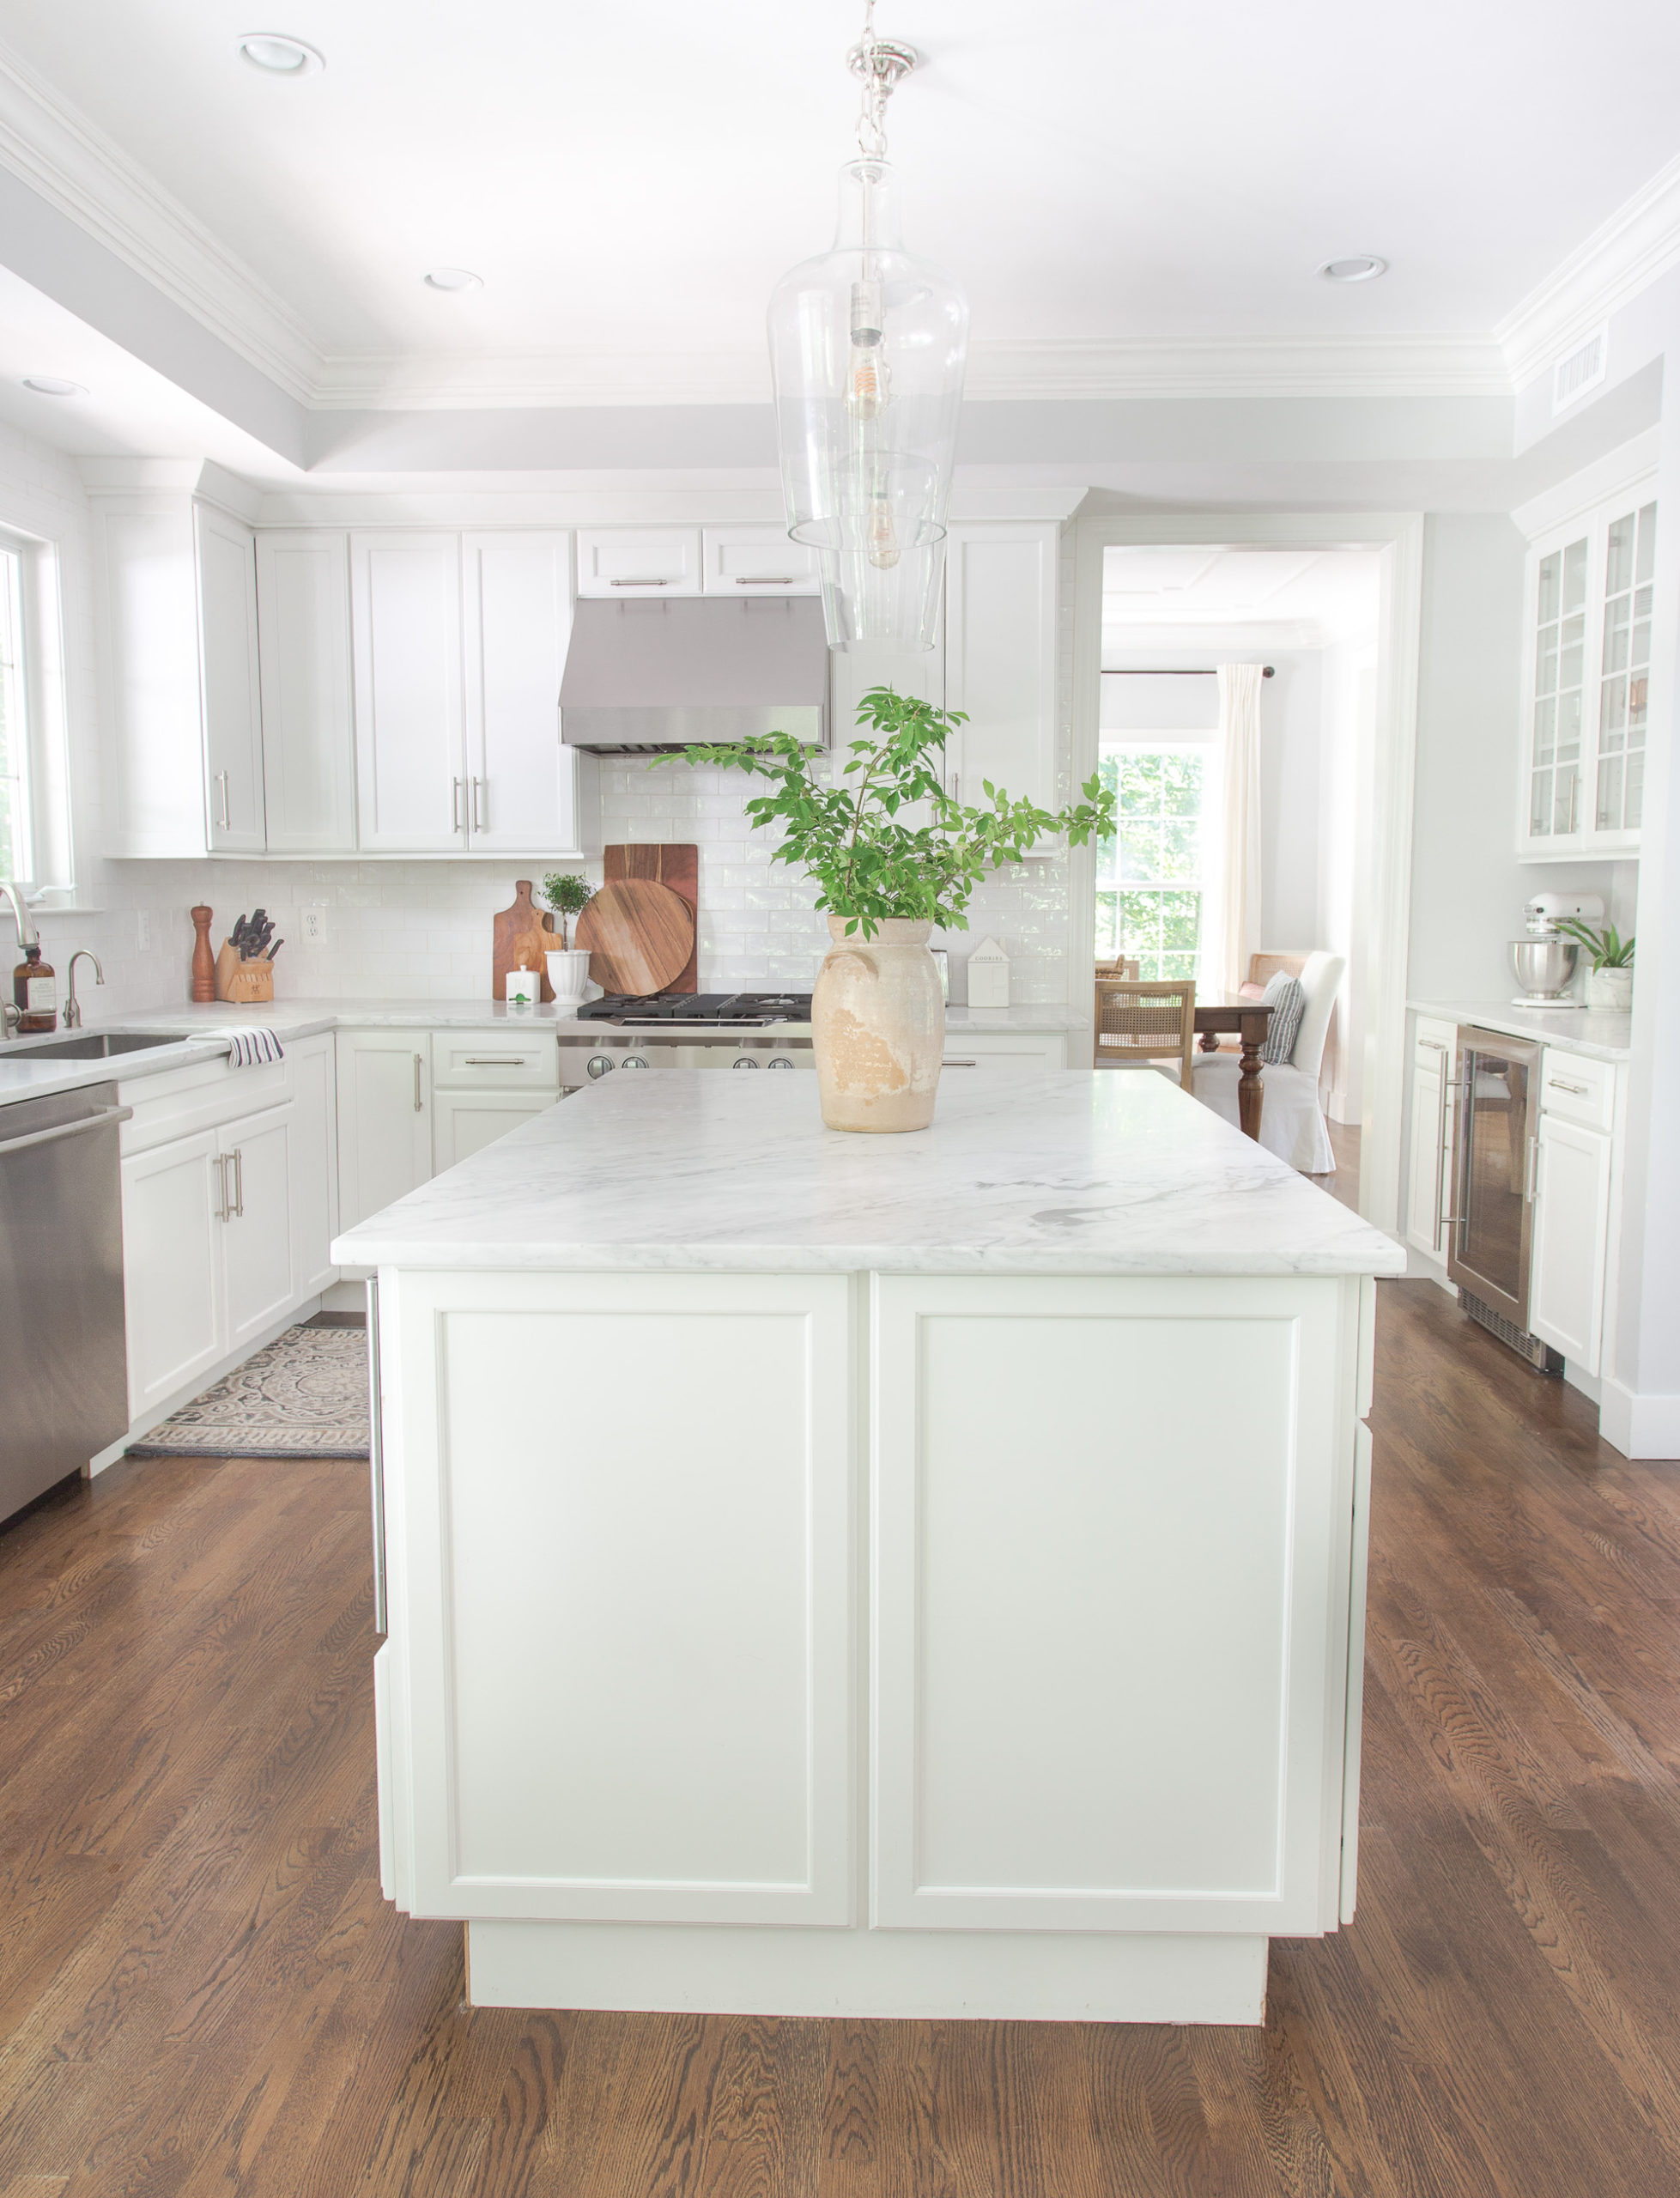 White kitchen with island with vase of greenery and dining in the background